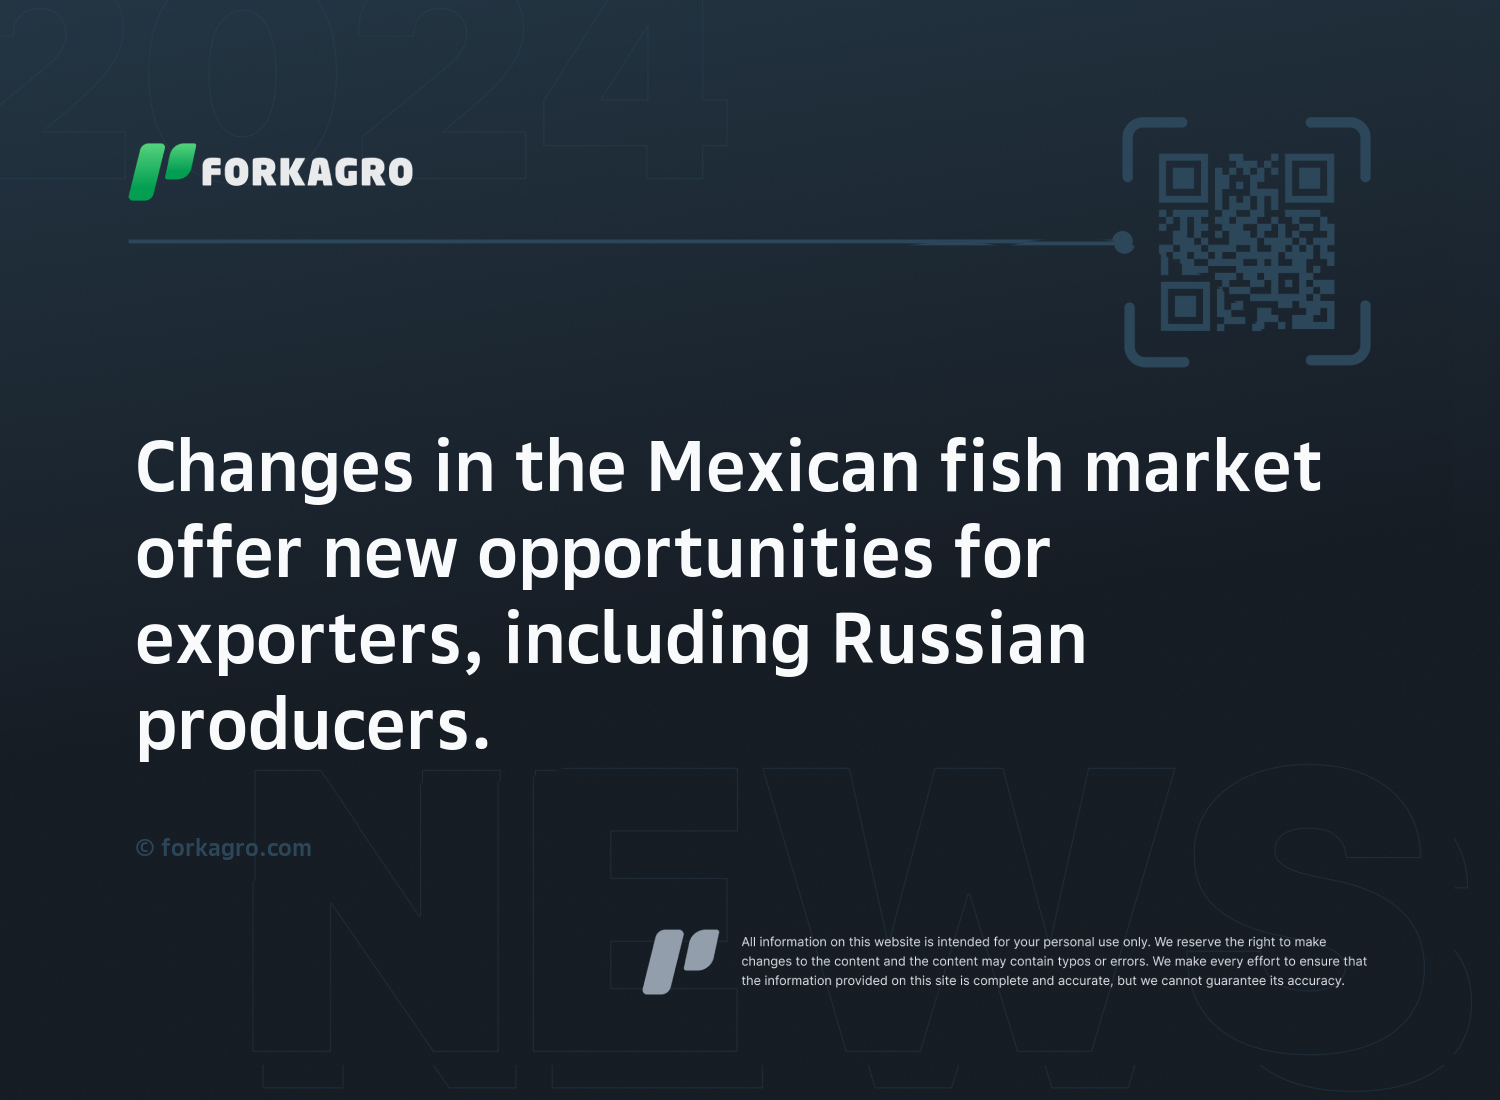 Changes in the Mexican fish market offer new opportunities for exporters, including Russian producers.